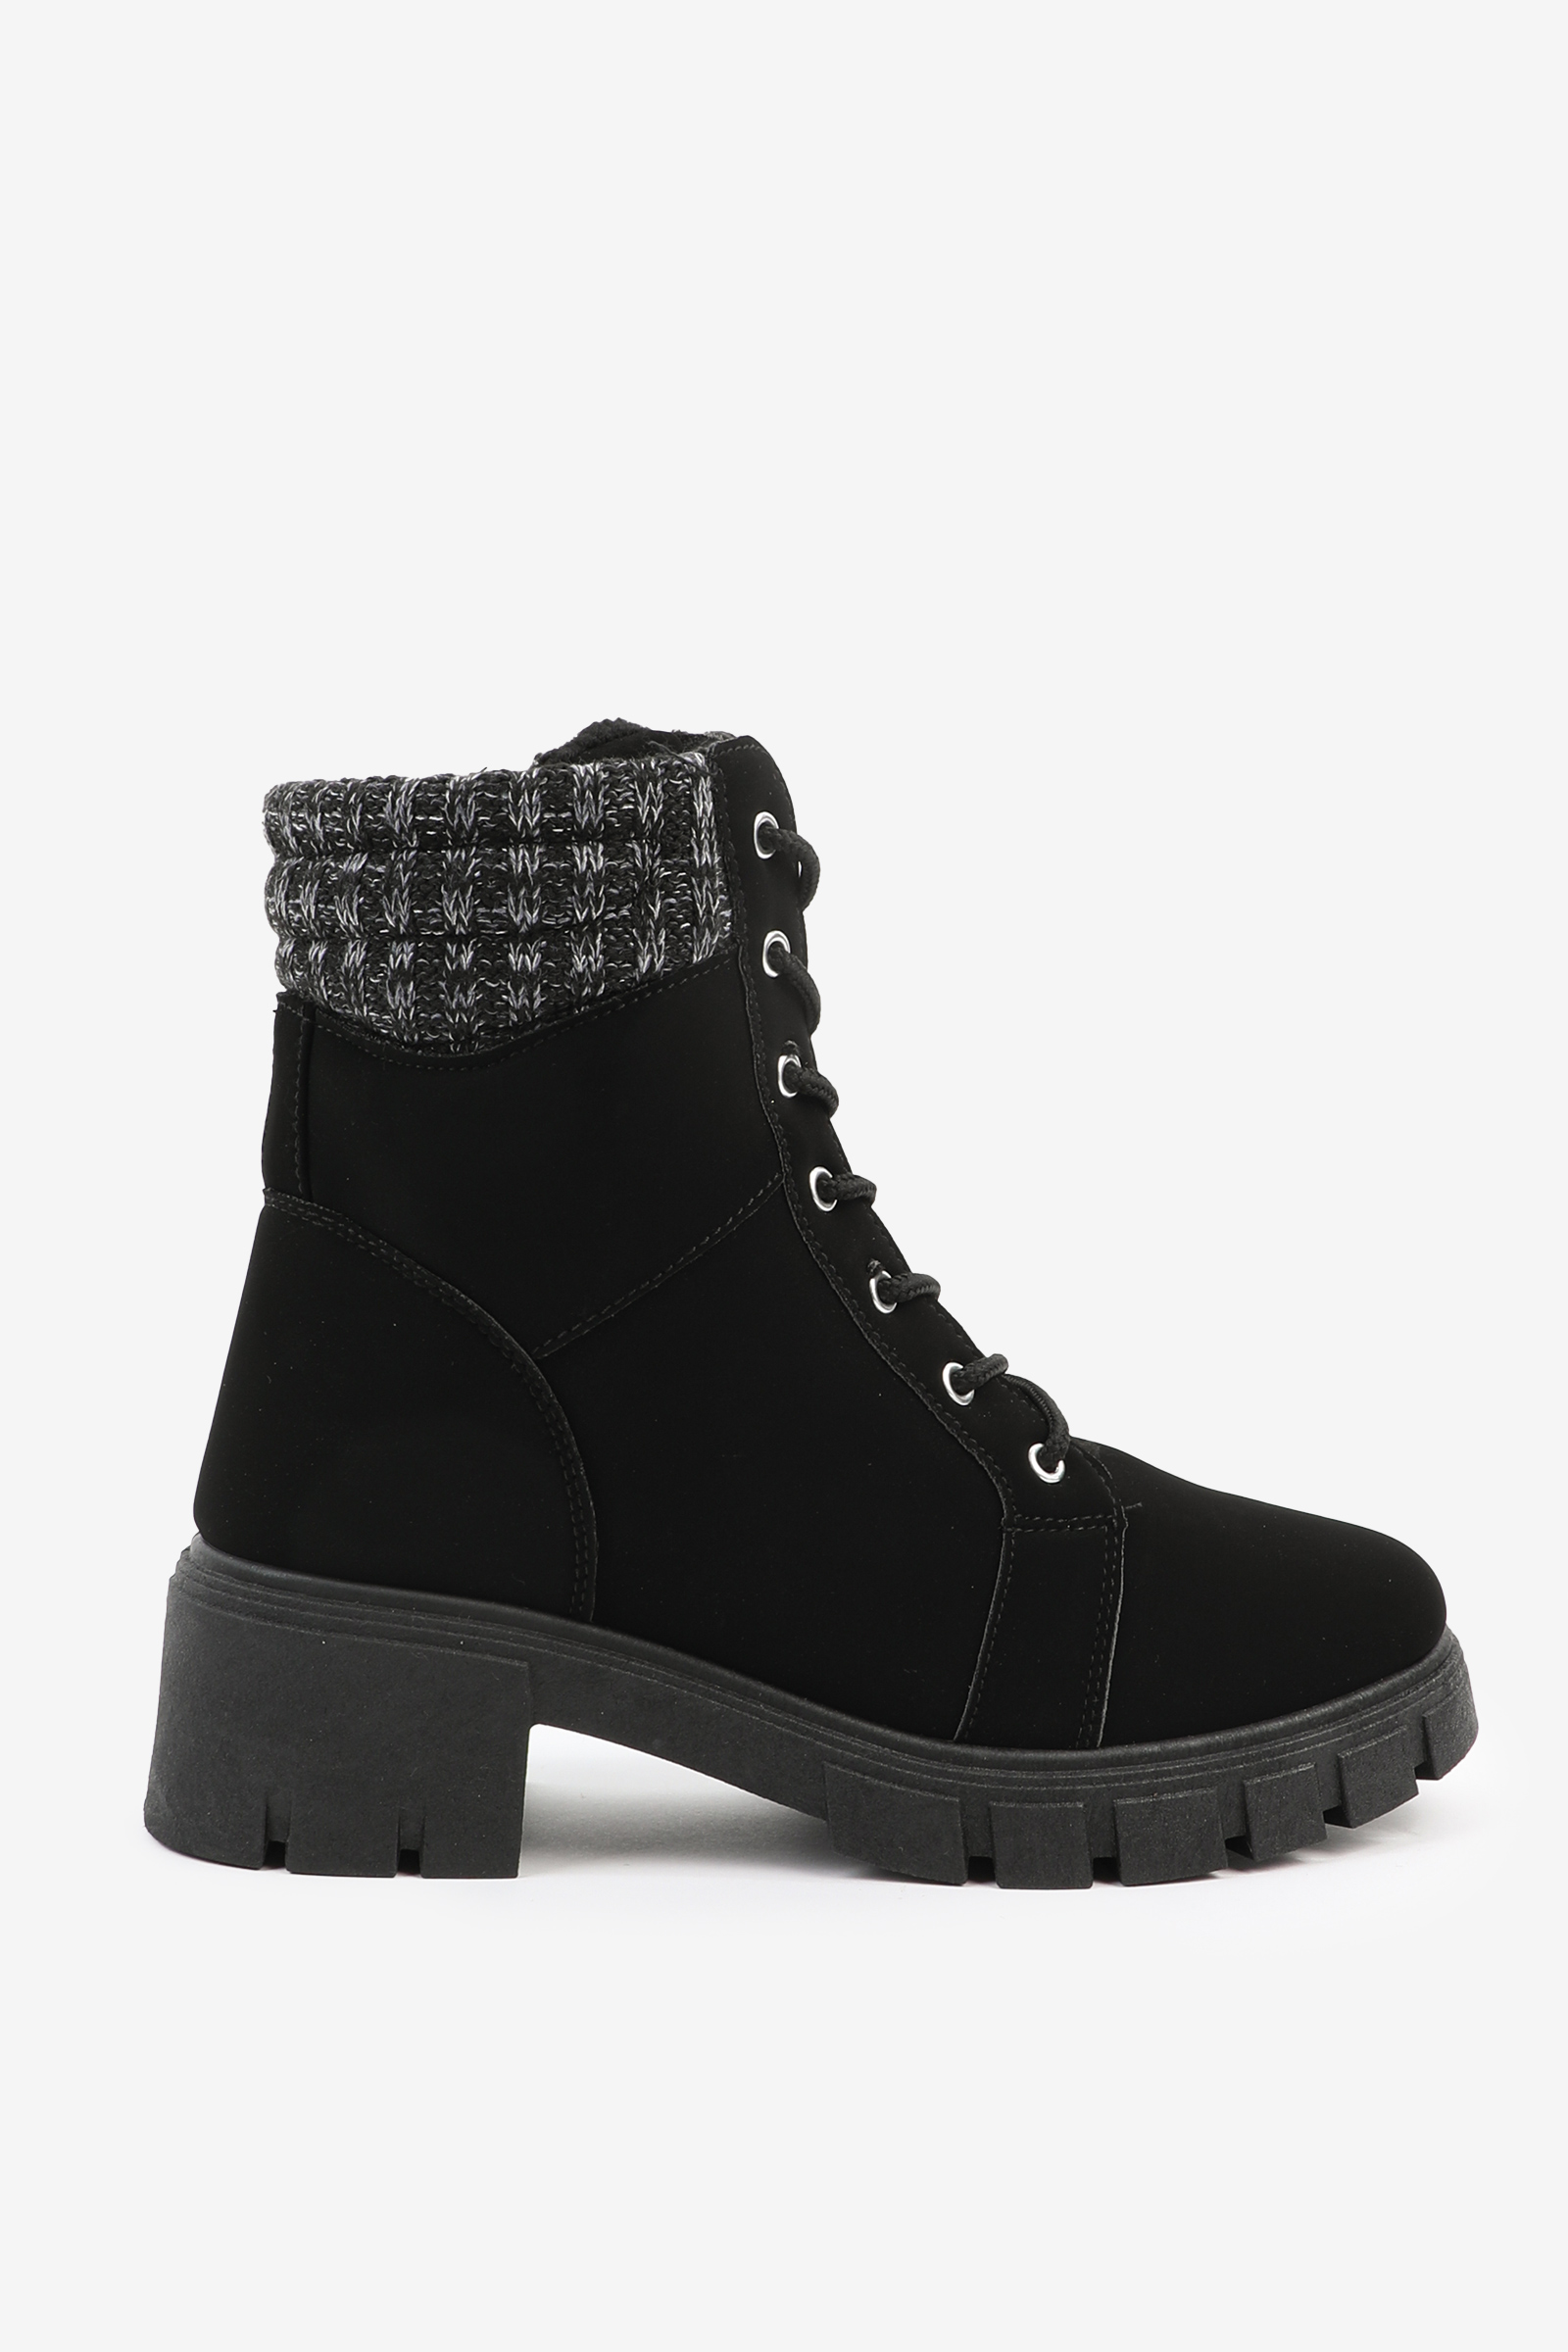 Ardene Warm-Lined Work Boots with Knit Collar in Black | Size 6 | Faux Suede/Rubber